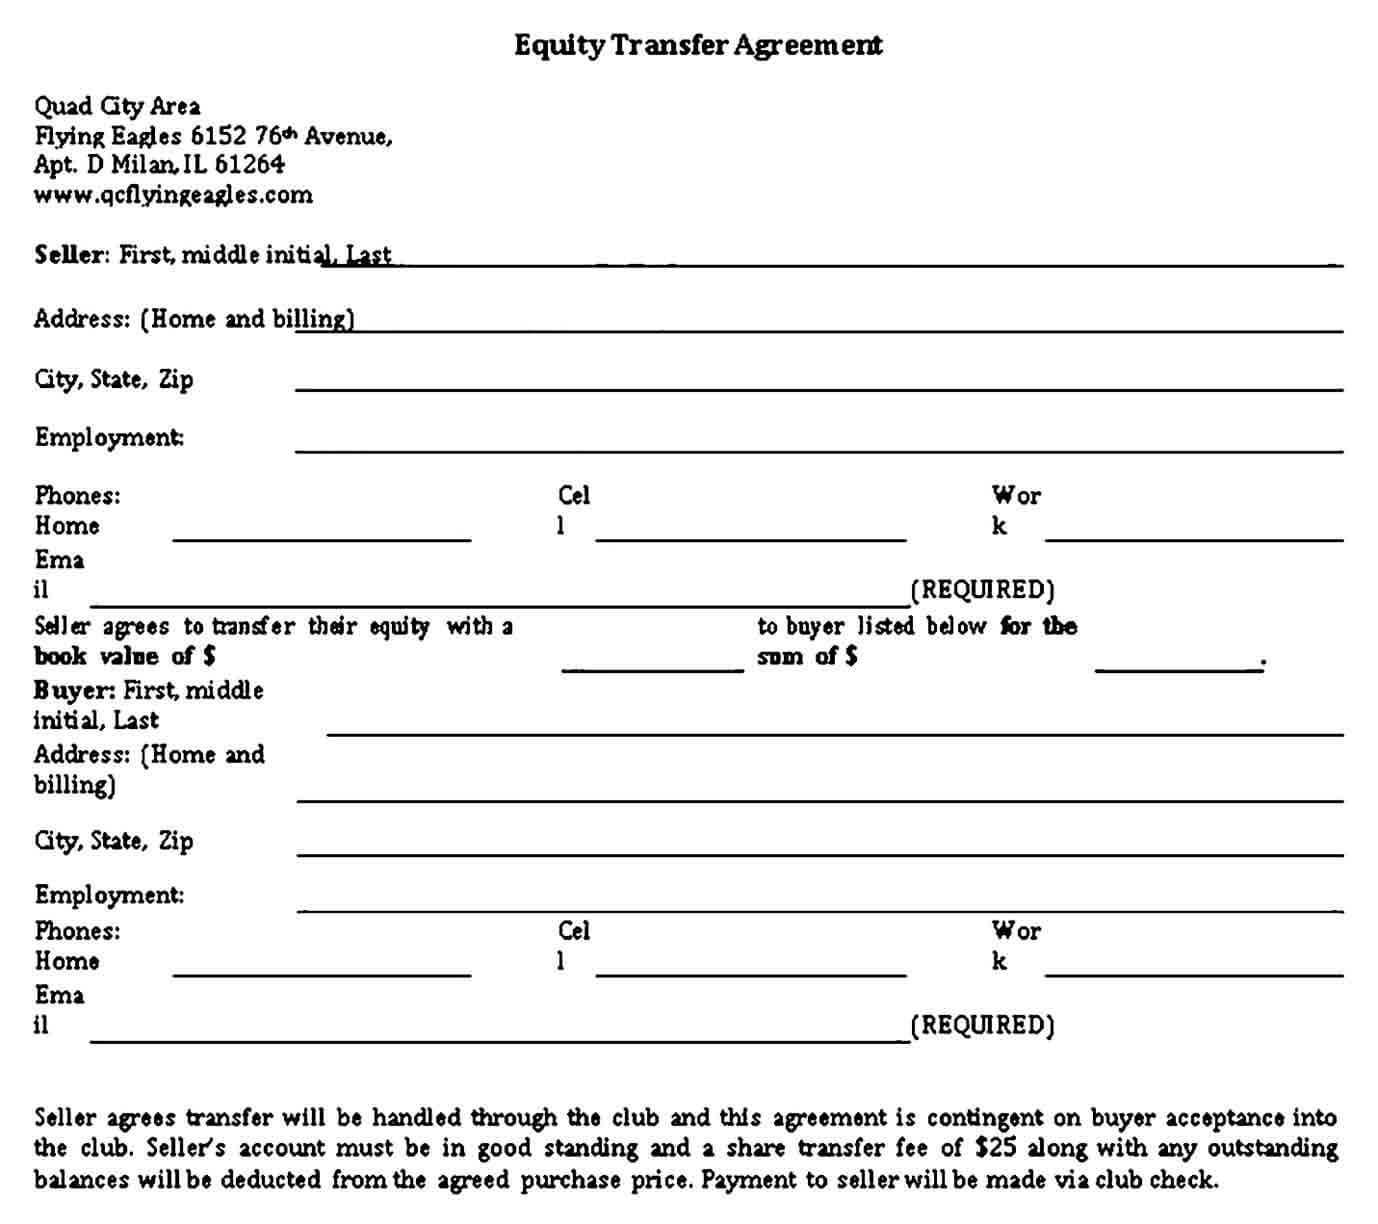 Equity Transfer Agreement